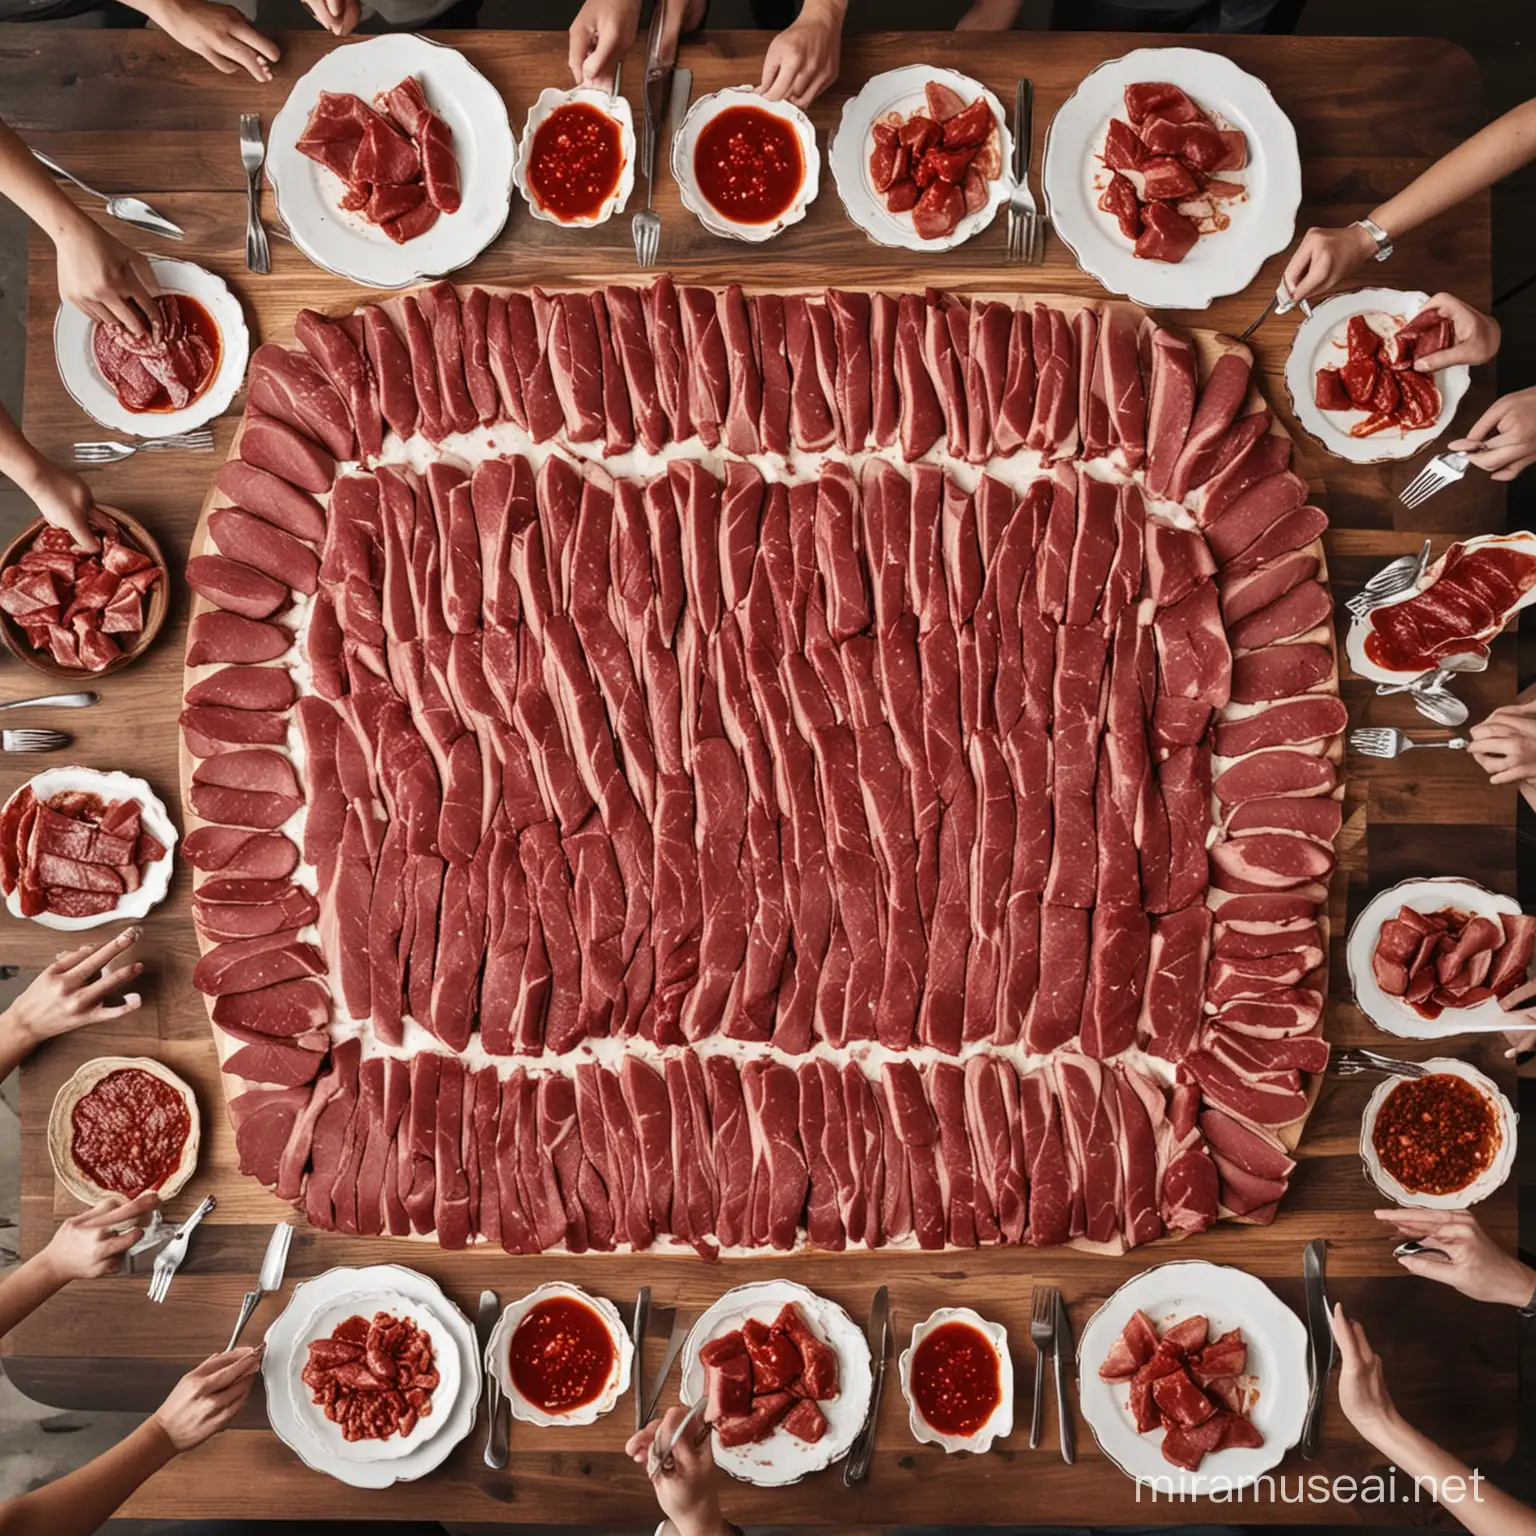 I want a real picture of a table full of red meat
 Make white meat. In this picture, no human being has joy
